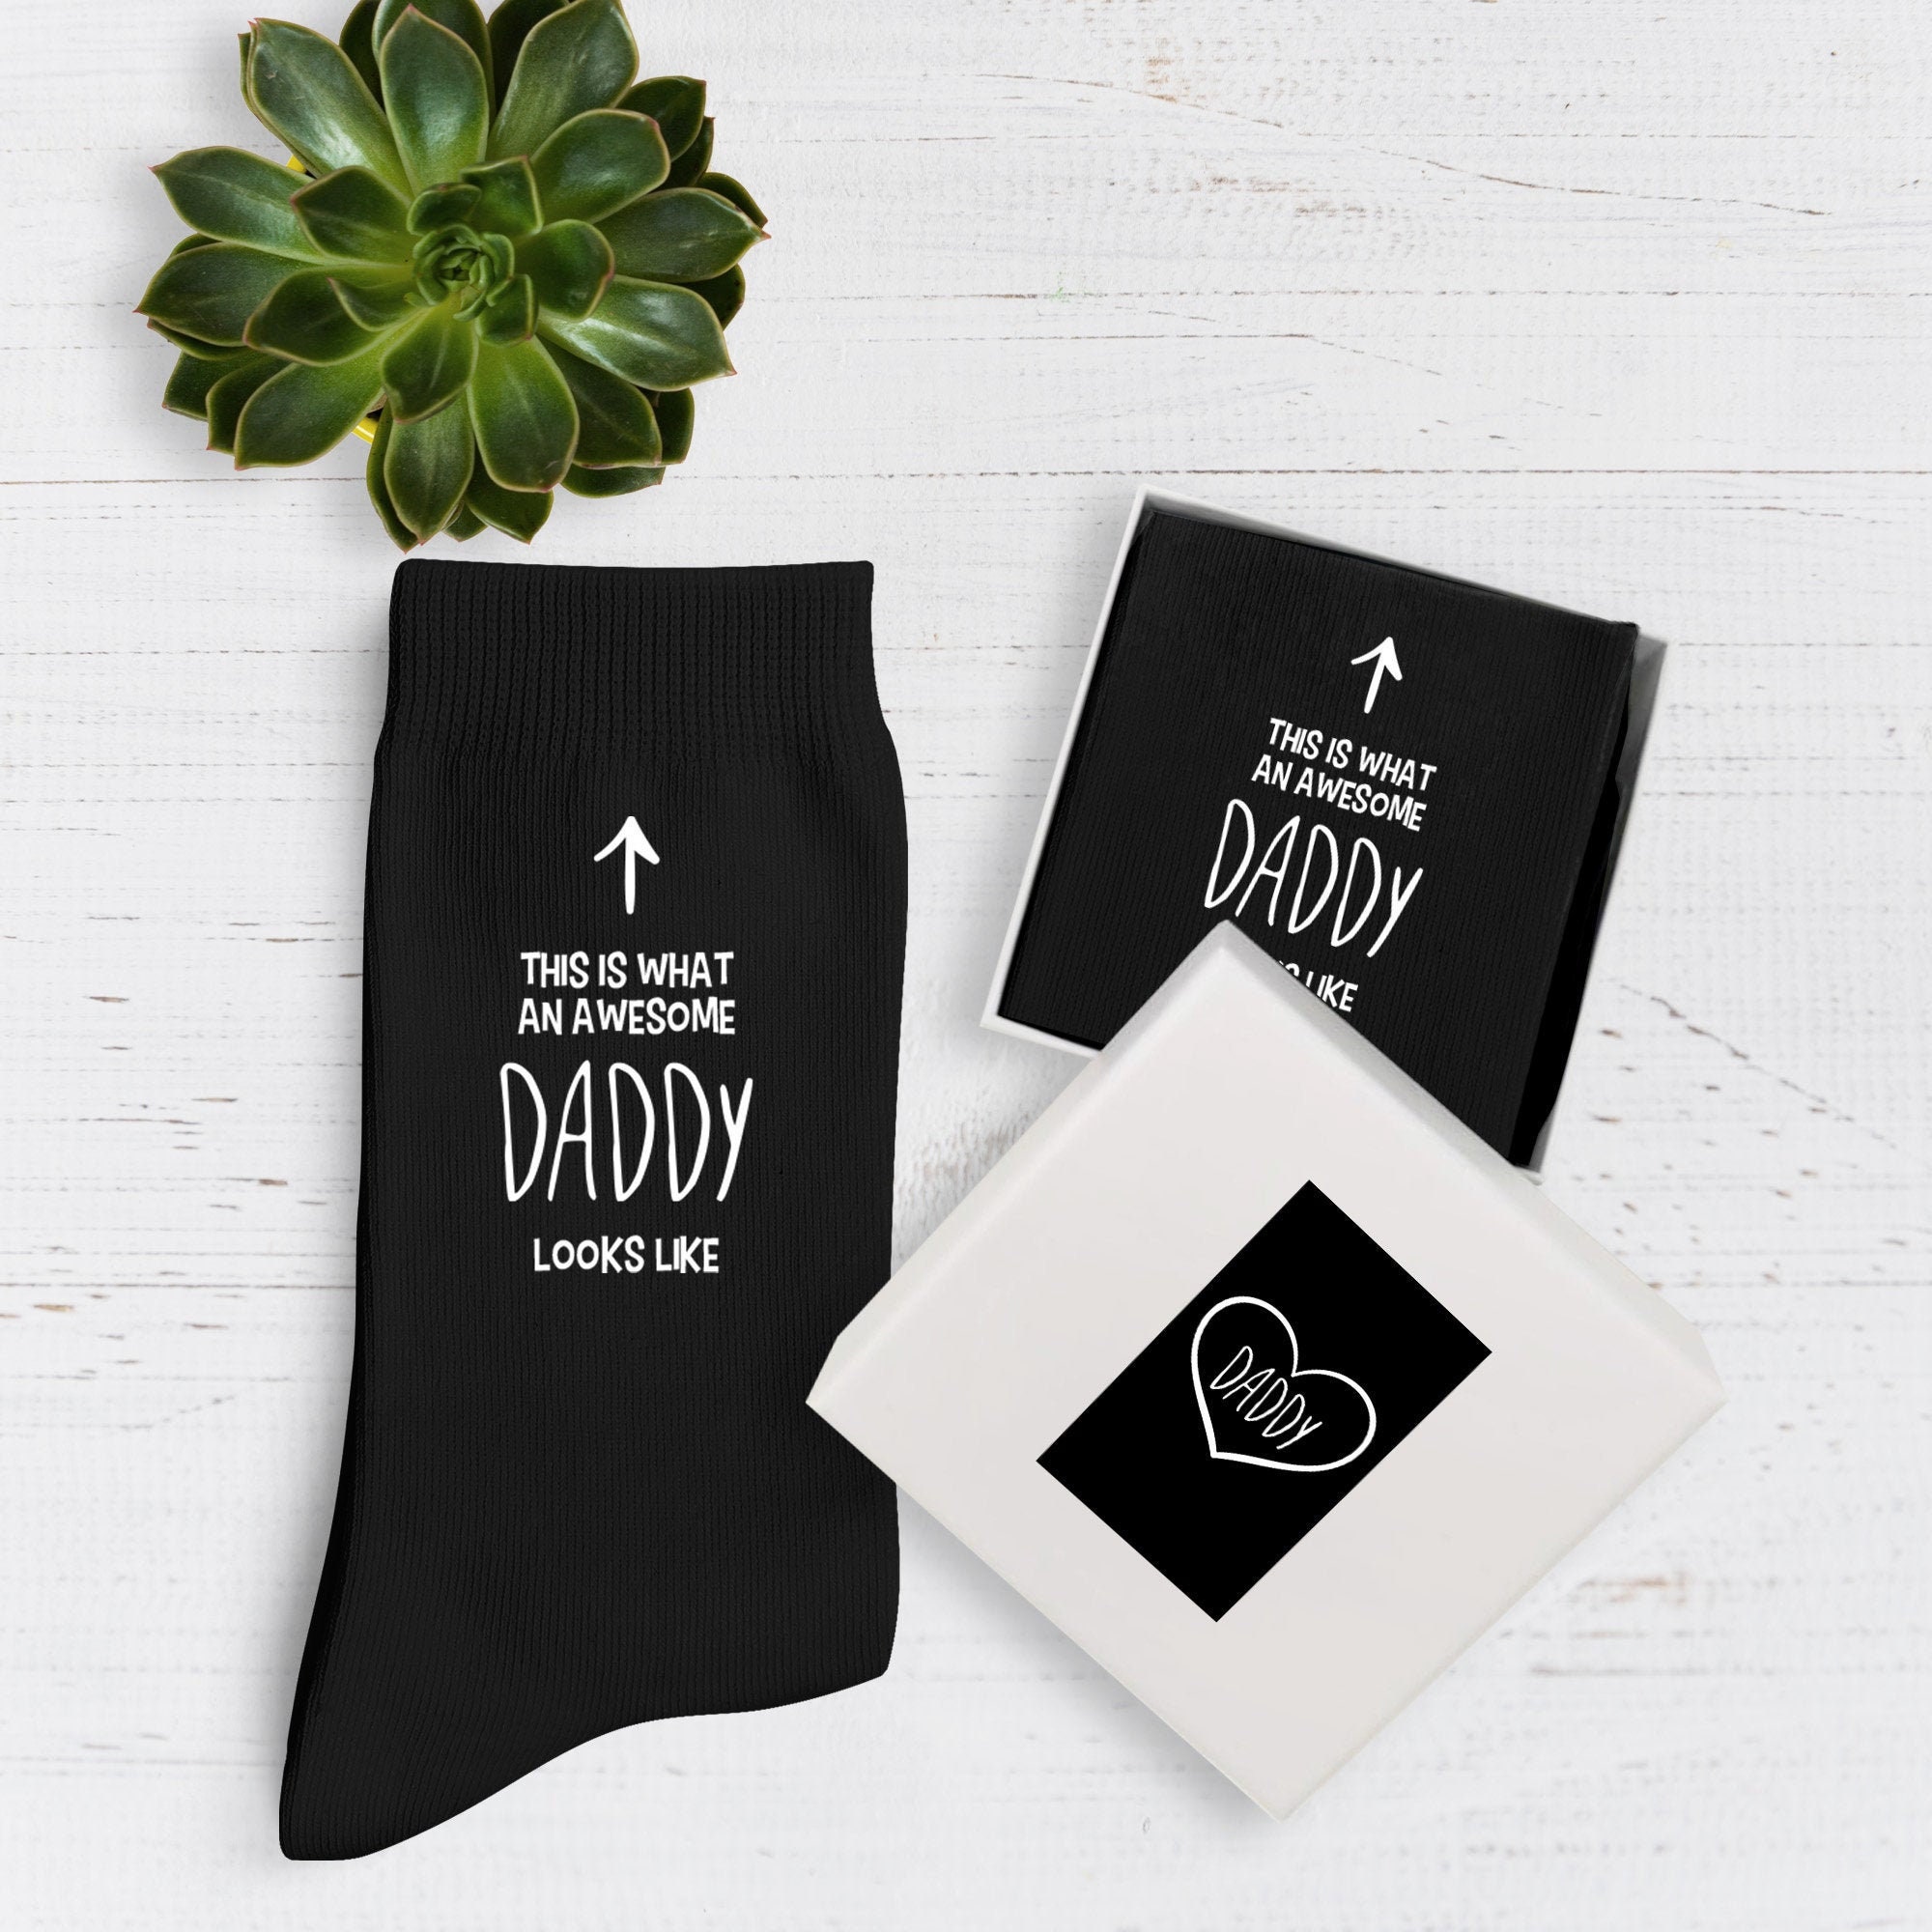 This Is What An Awesome Daddy Looks Like Cotton Socks/New Father Gift For Dad Christmas Present Pregnancy Announcement Idea